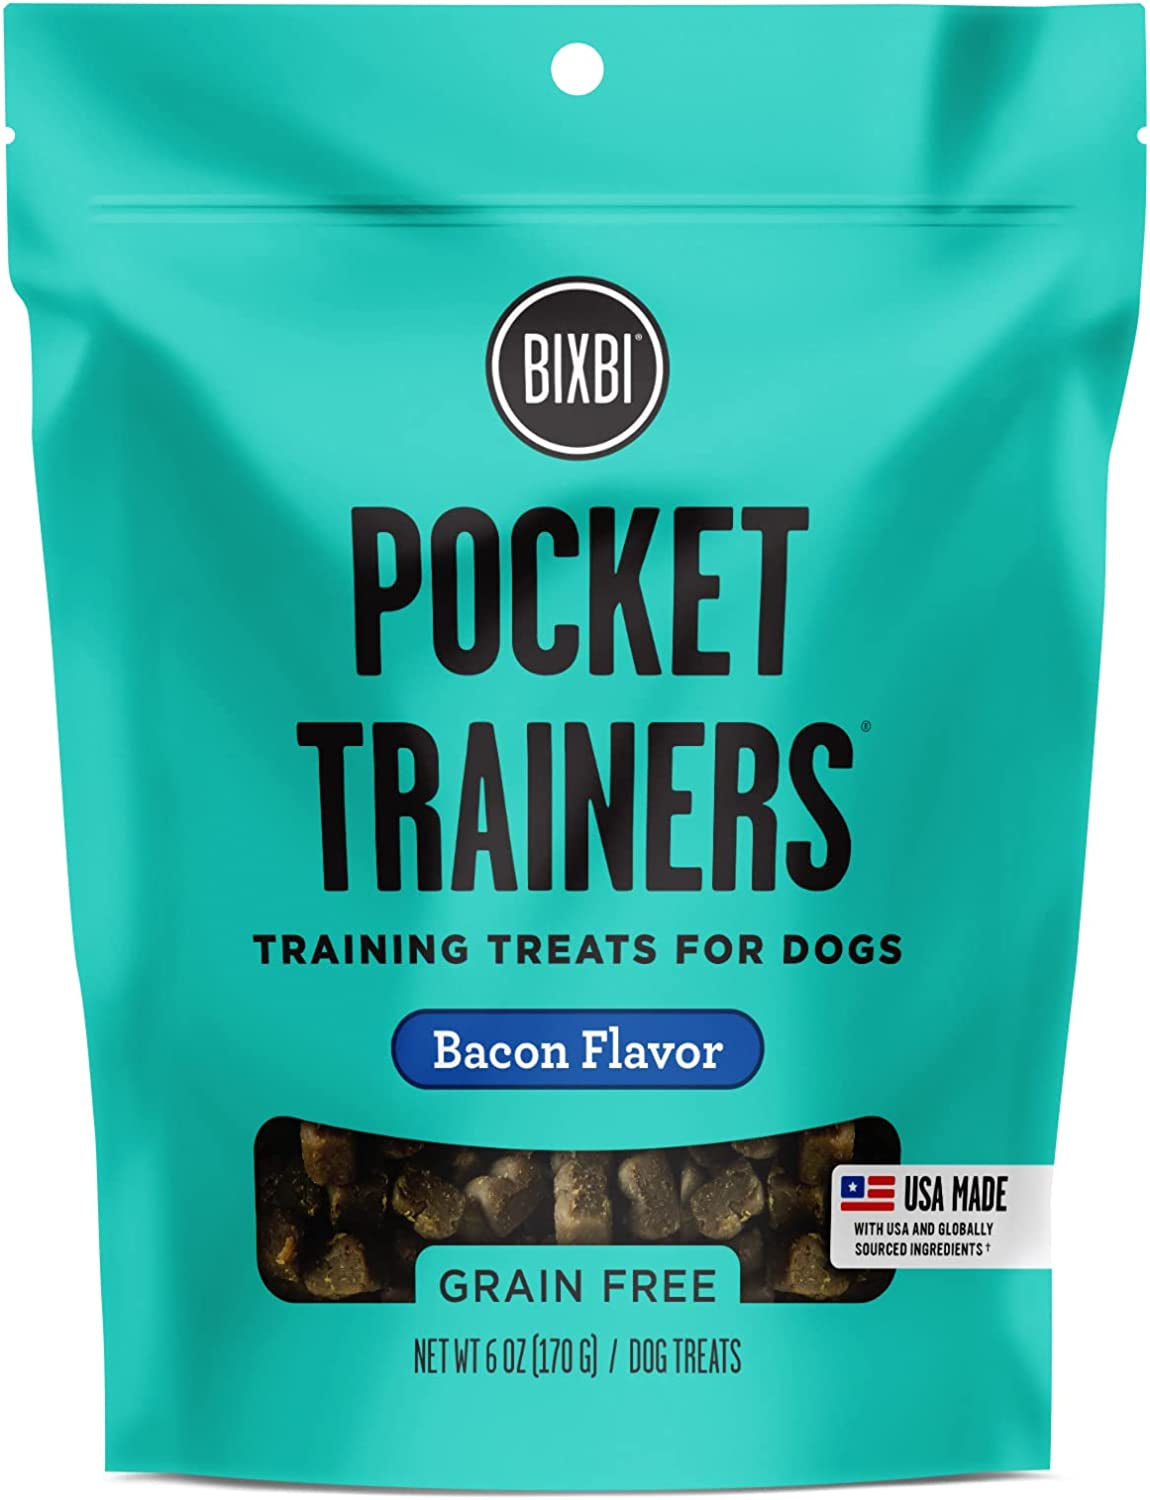 BIXBI Pocket Trainers, Bacon (6 Oz, 1 Pouch) - Small Training Treats for Dogs - Low Calorie and Grain Free Dog Treats, Flavorful Pocket Size Healthy and All Natural Dog Treats